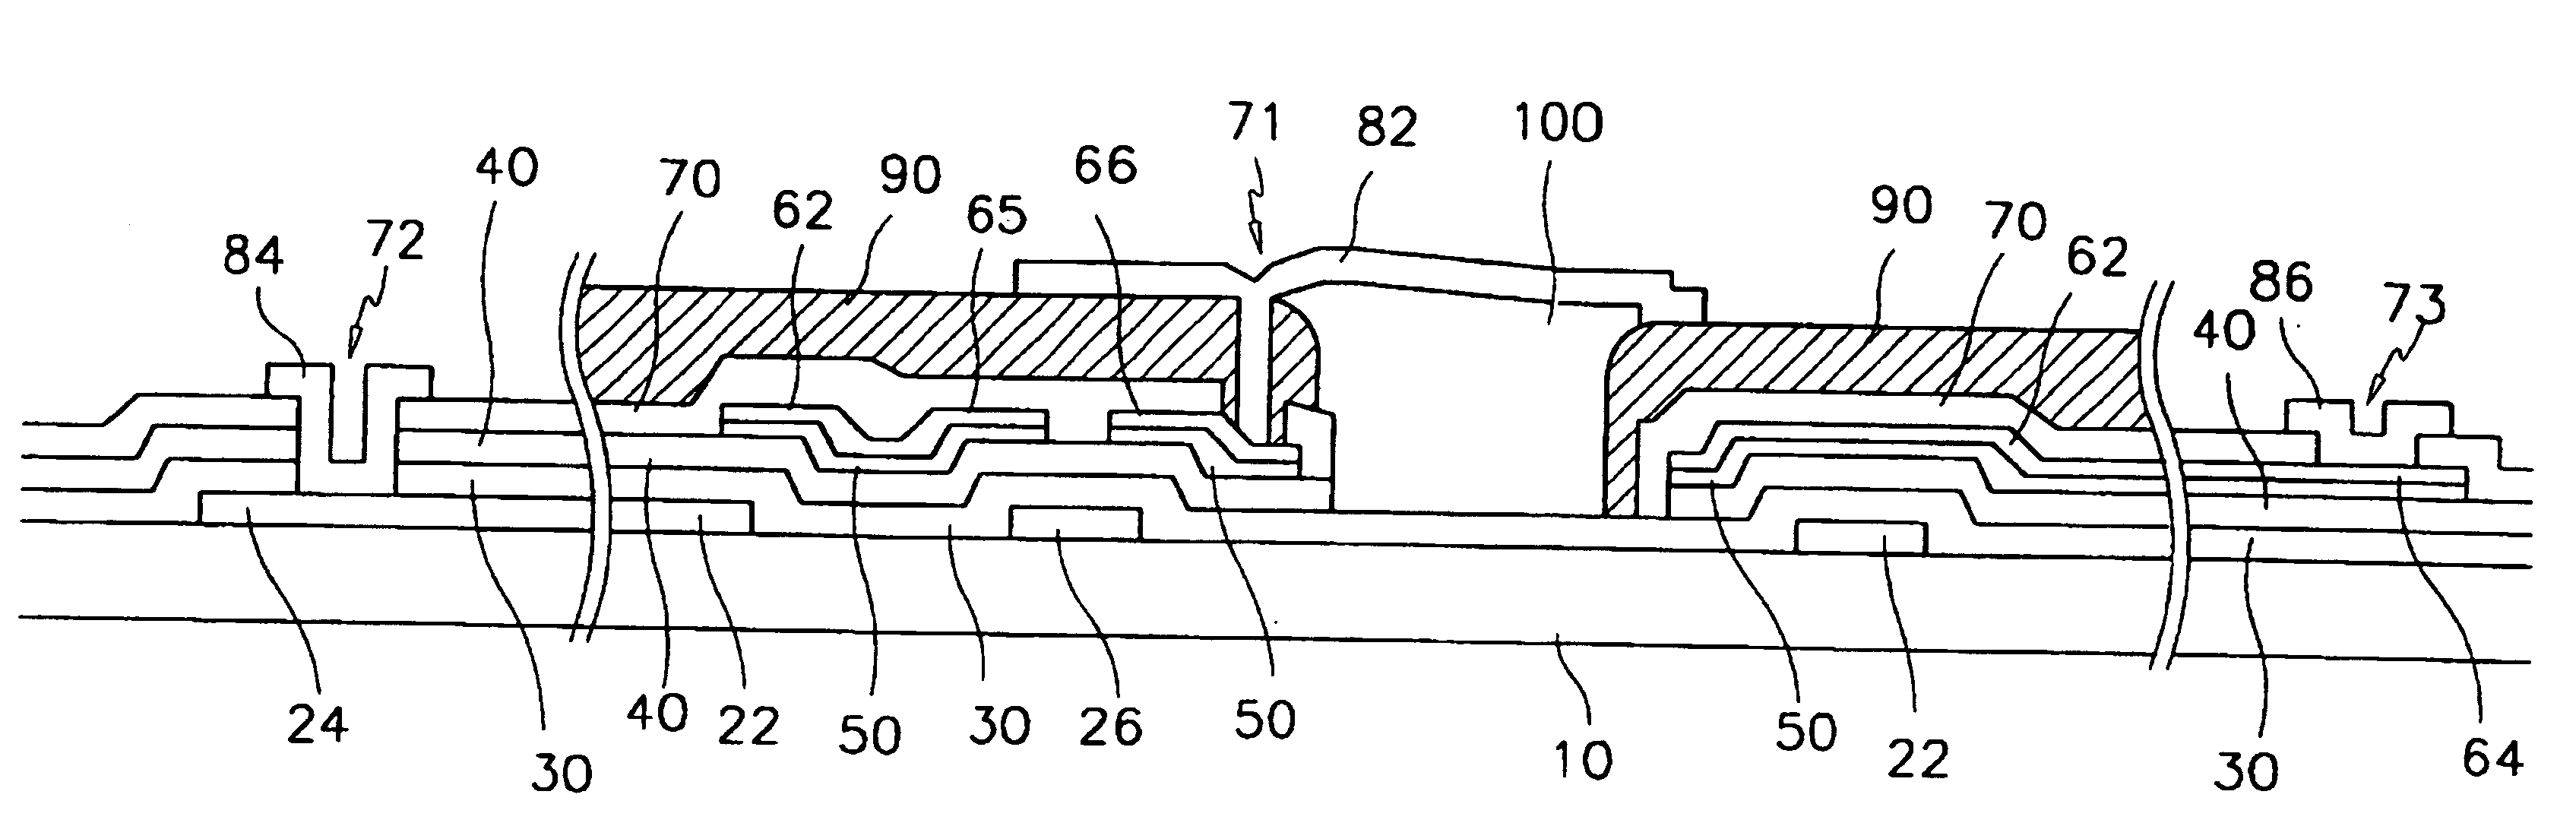 Thin film transistor array substrate for a liquid crystal display